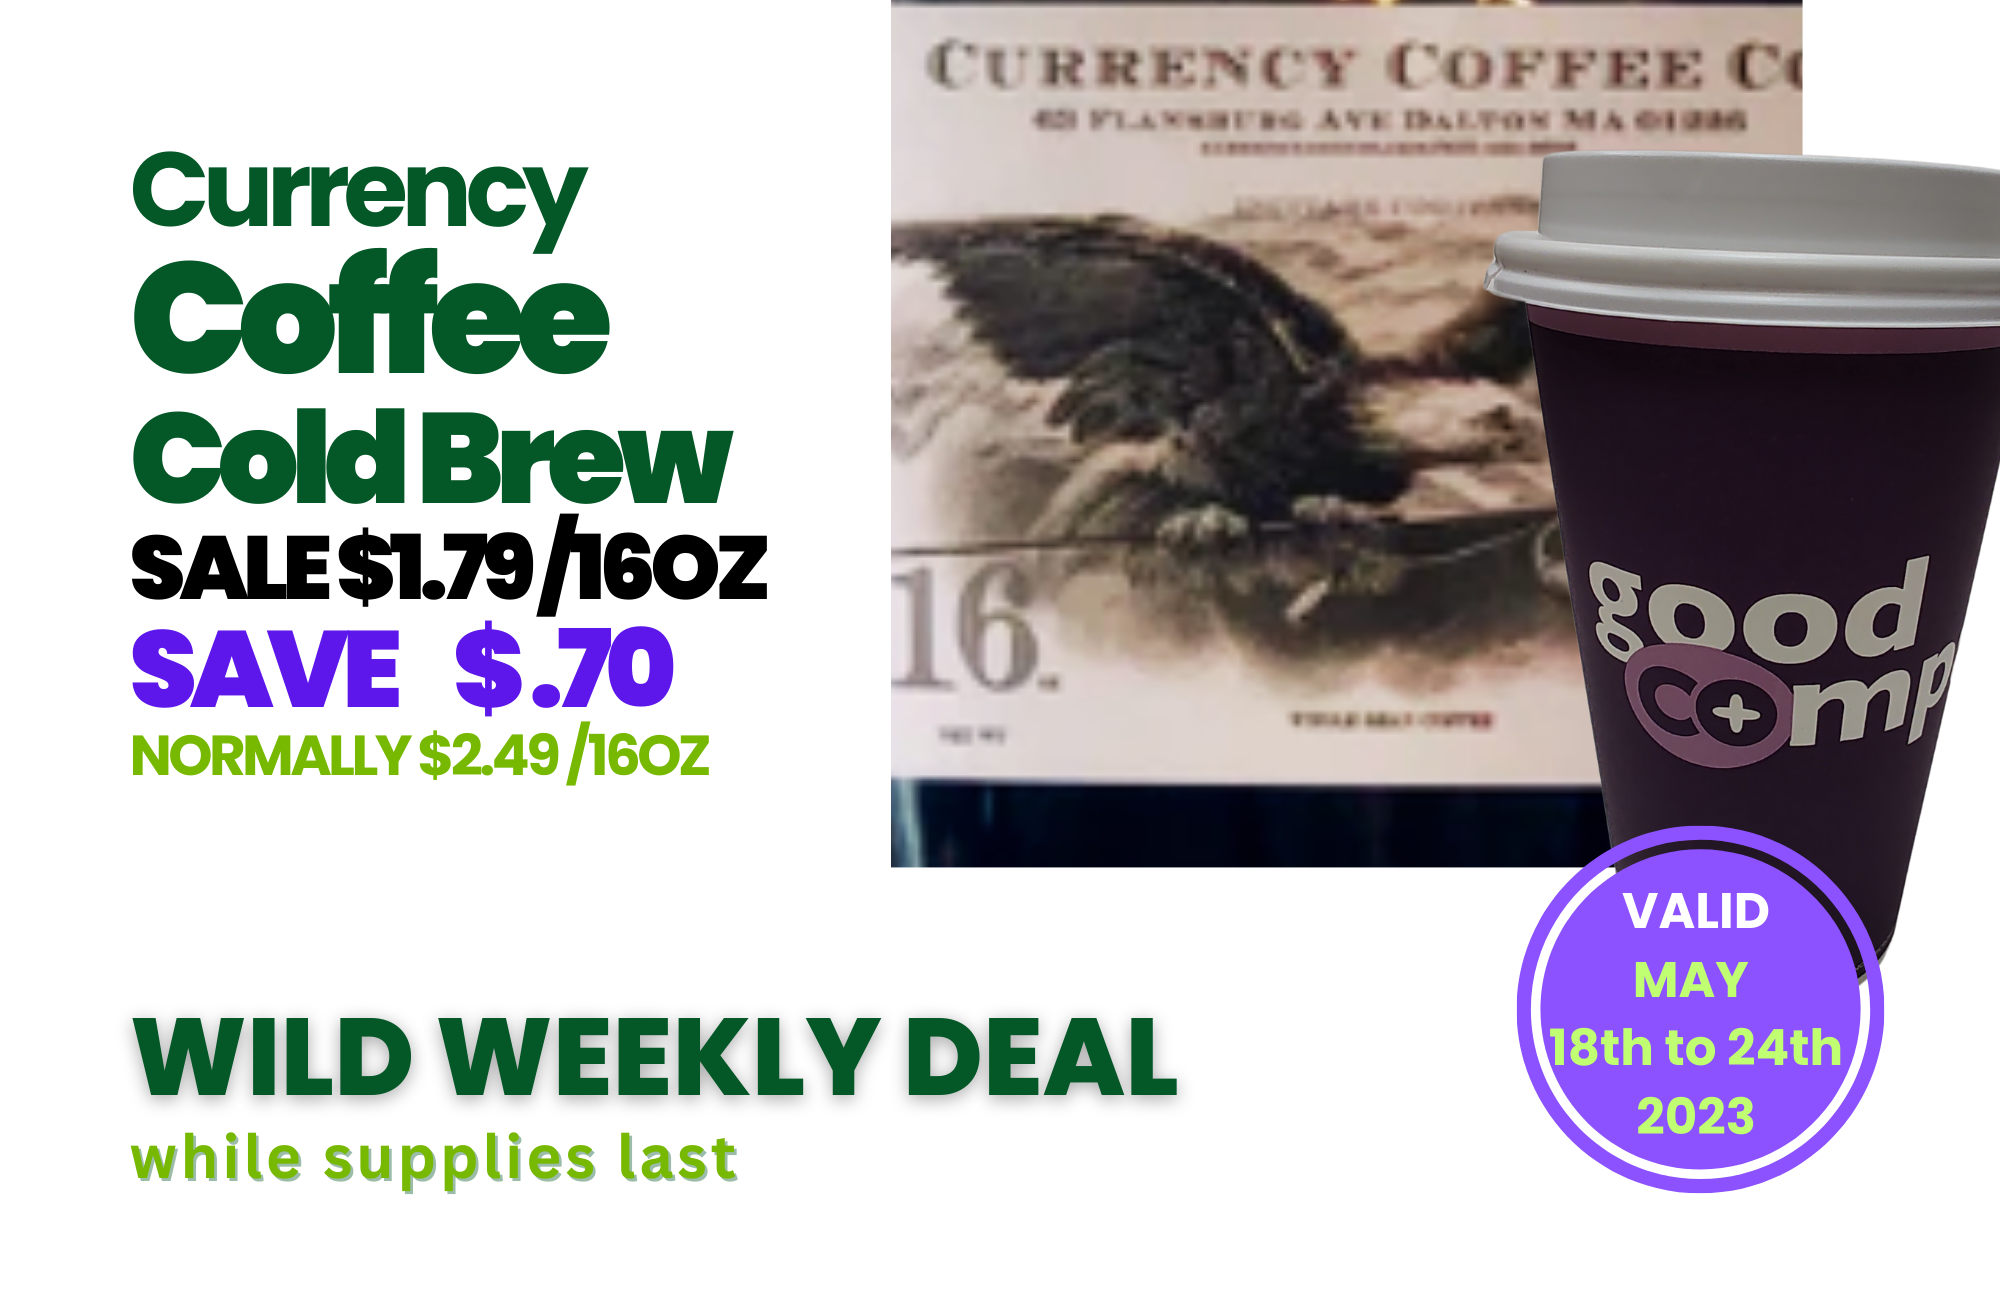 Wild Oats Market Williamstown MA Weekly Deals May 18-24 2023 Currency Coffee Cold Brew.png